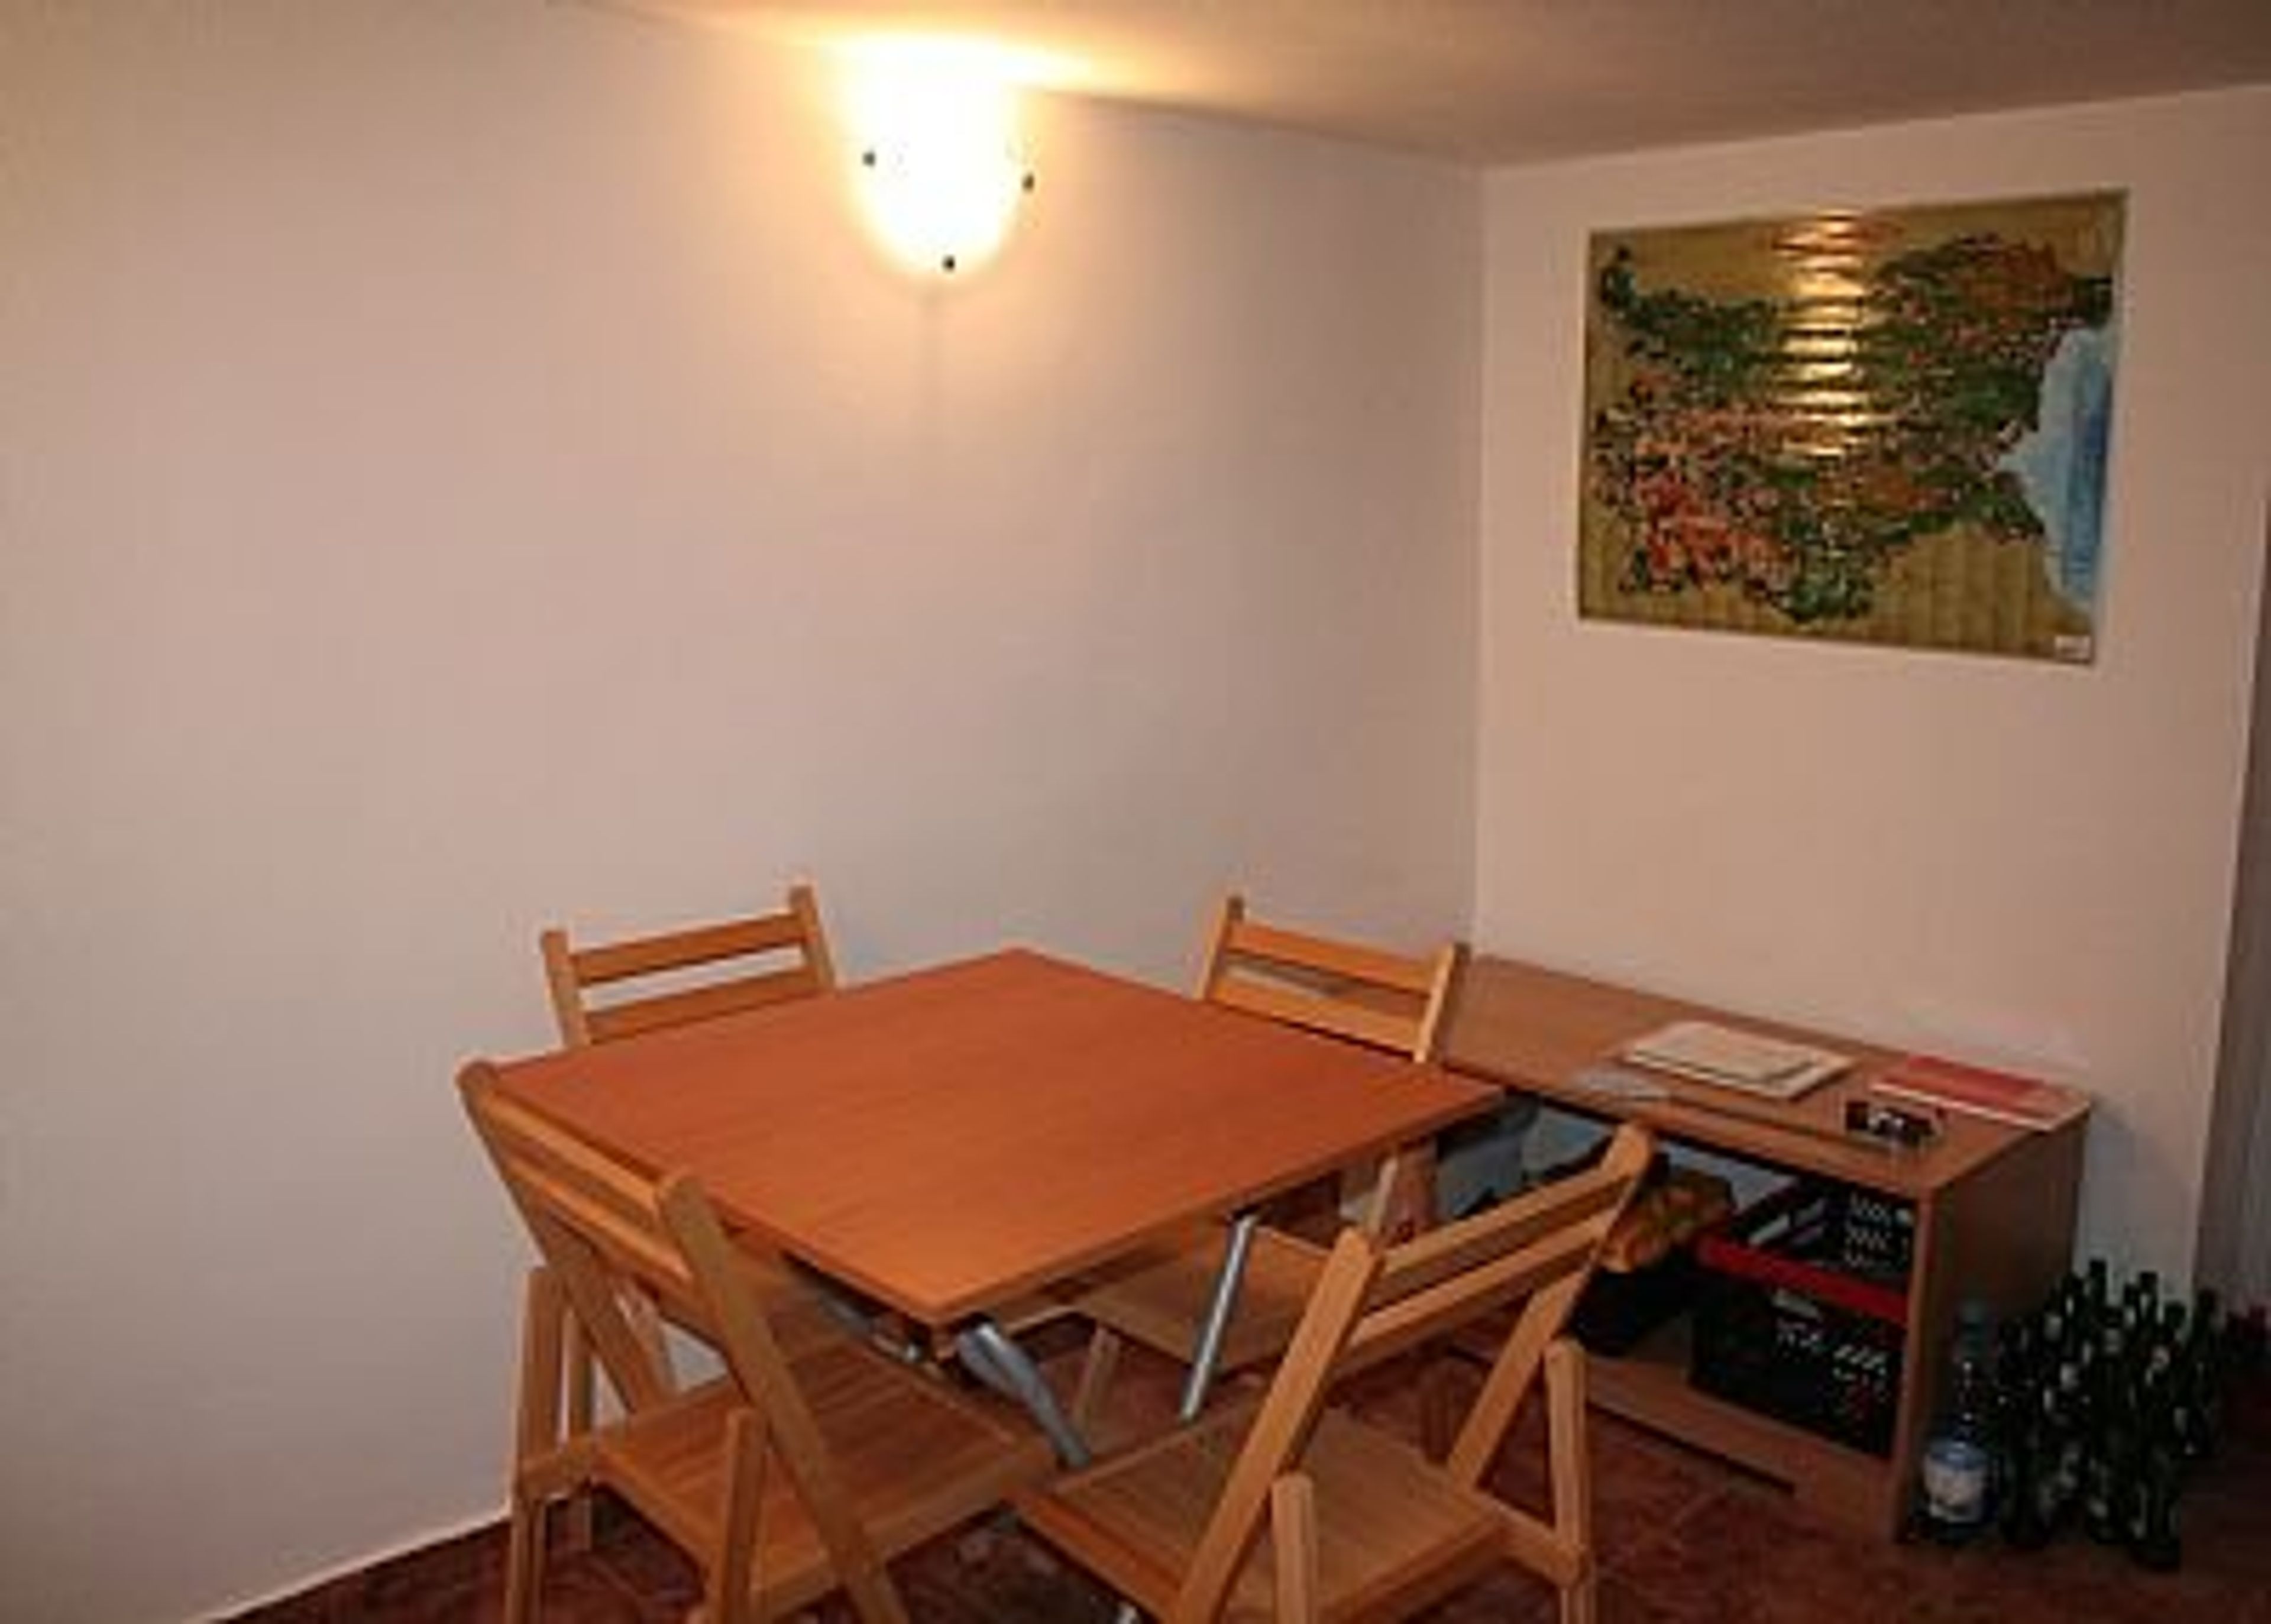 dining area in kitchen